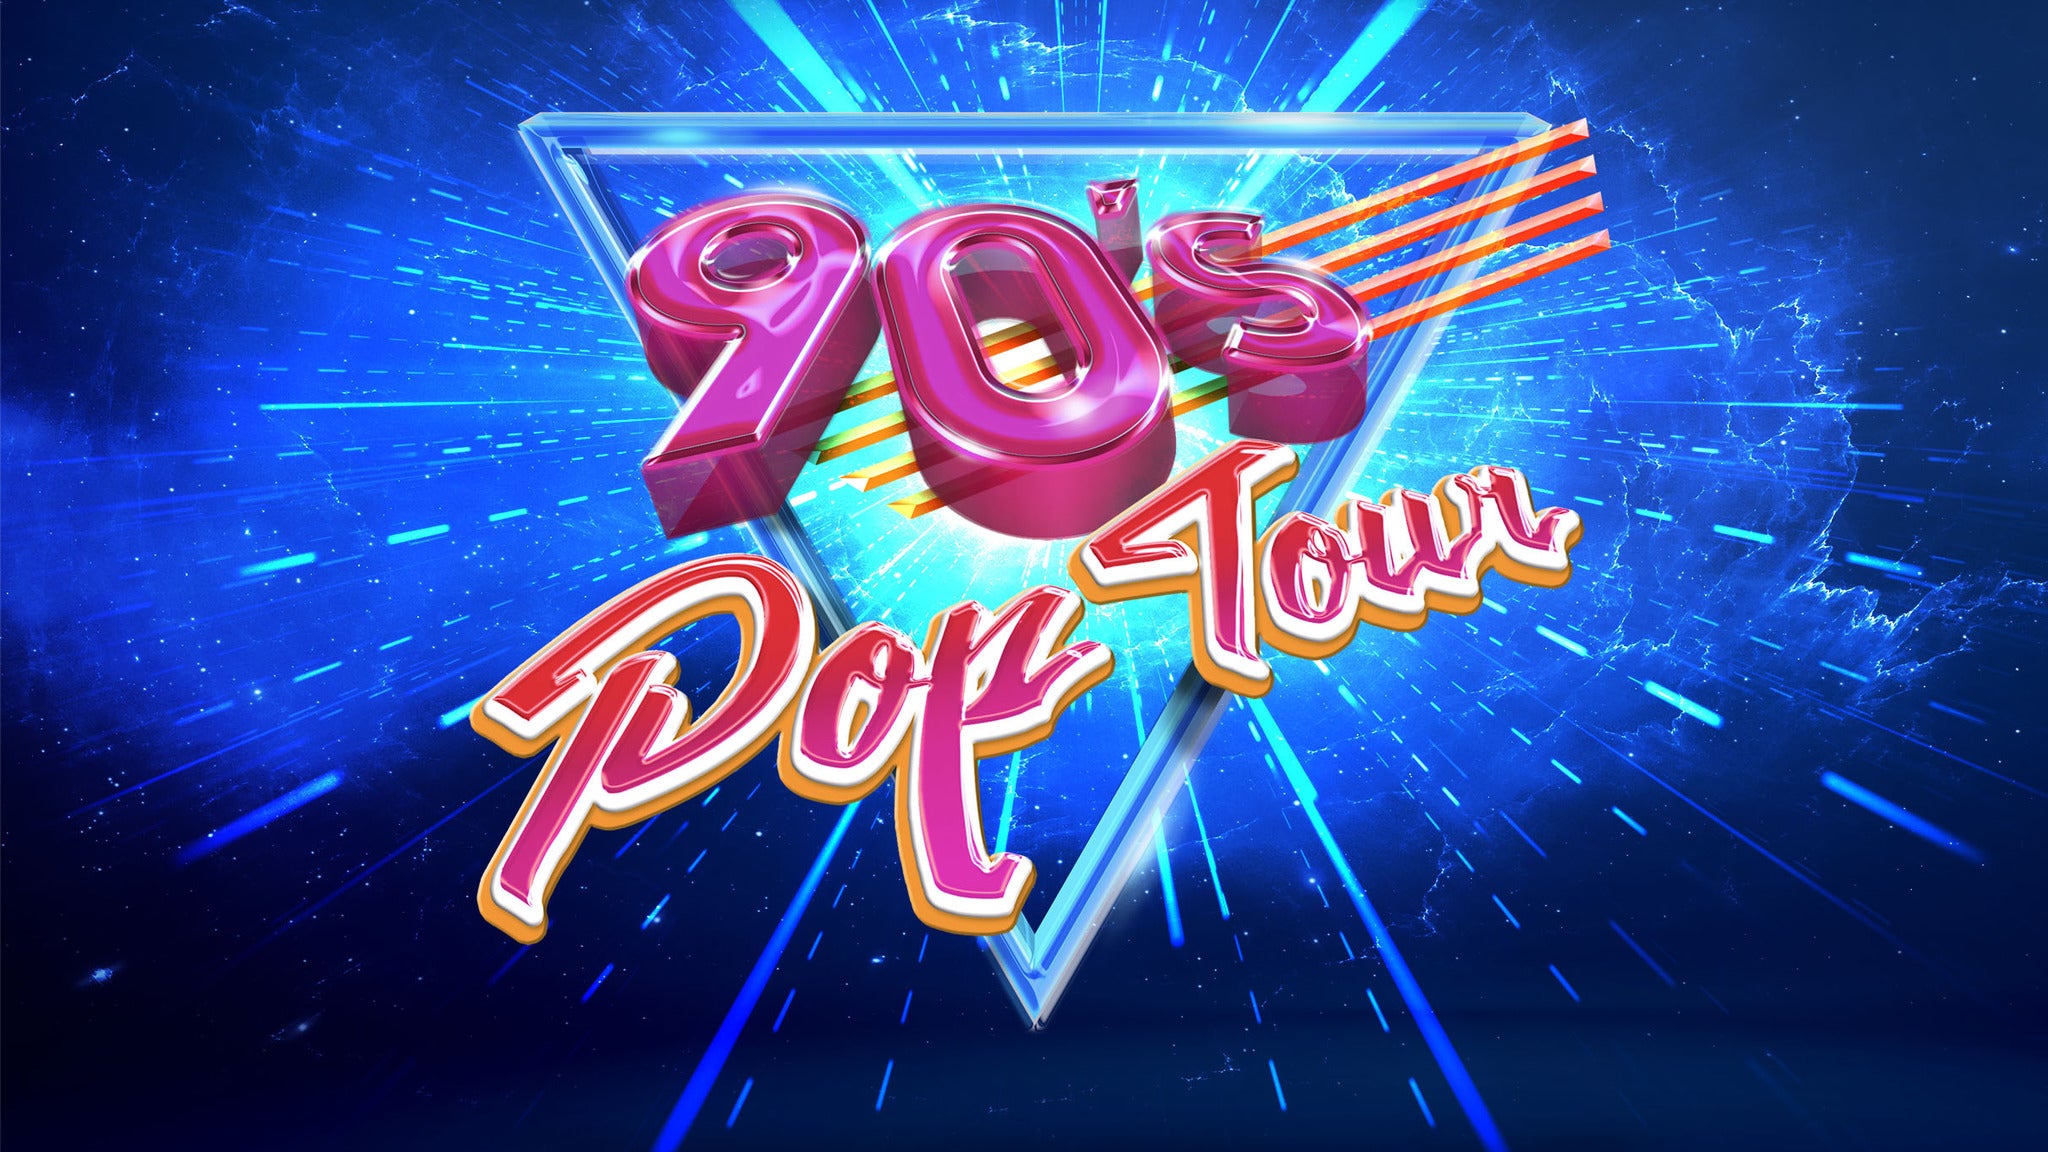 accurate presale code for 90's Pop Tour advanced tickets in Inglewood at Kia Forum